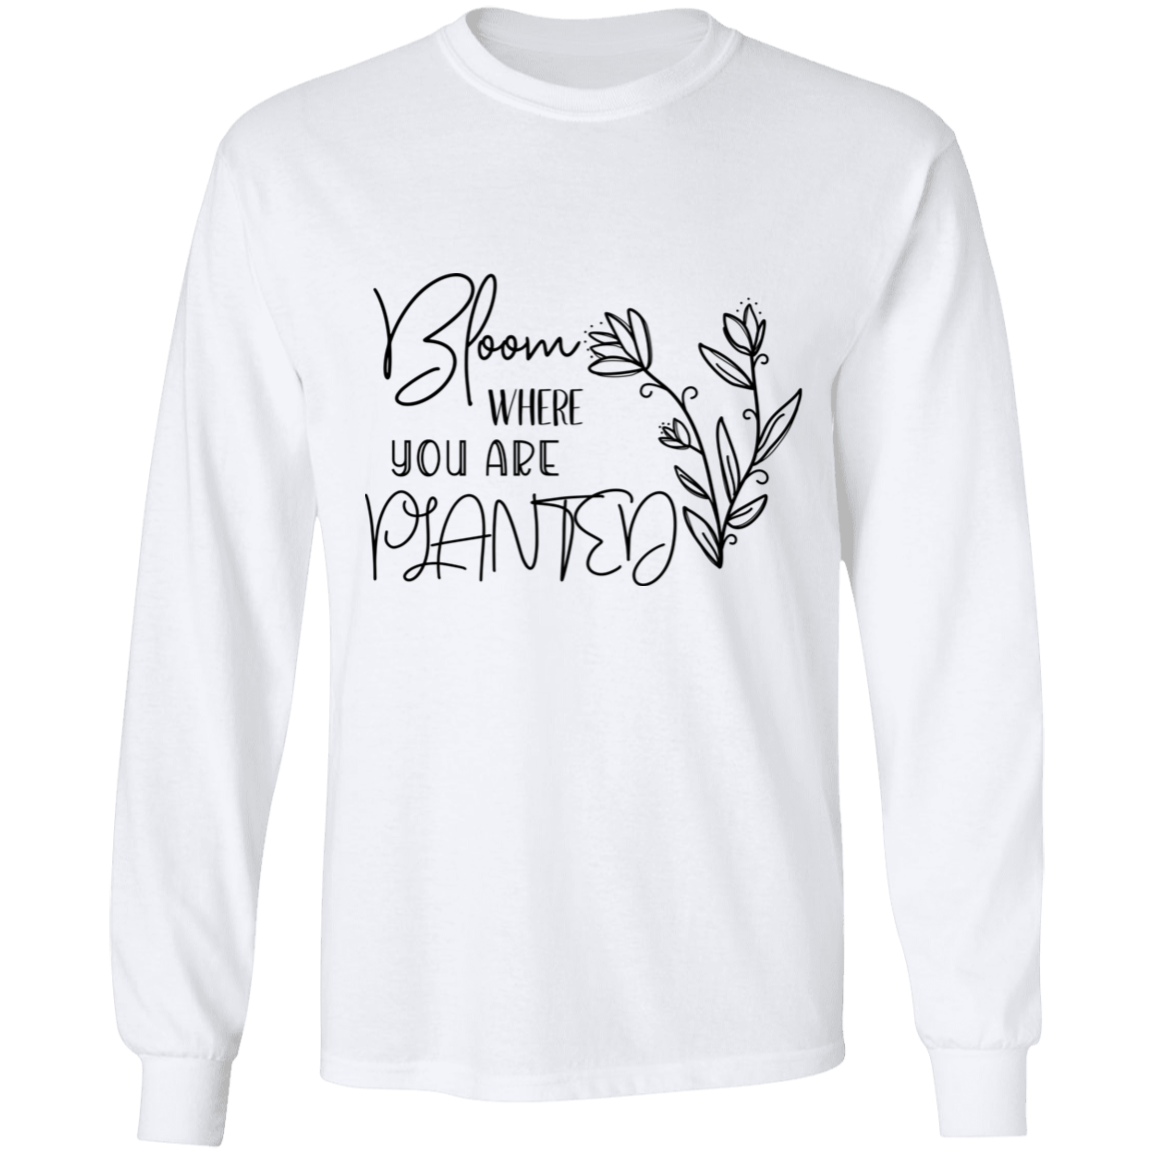 Bloom where you are planted long sleeve Cotton T-Shirt